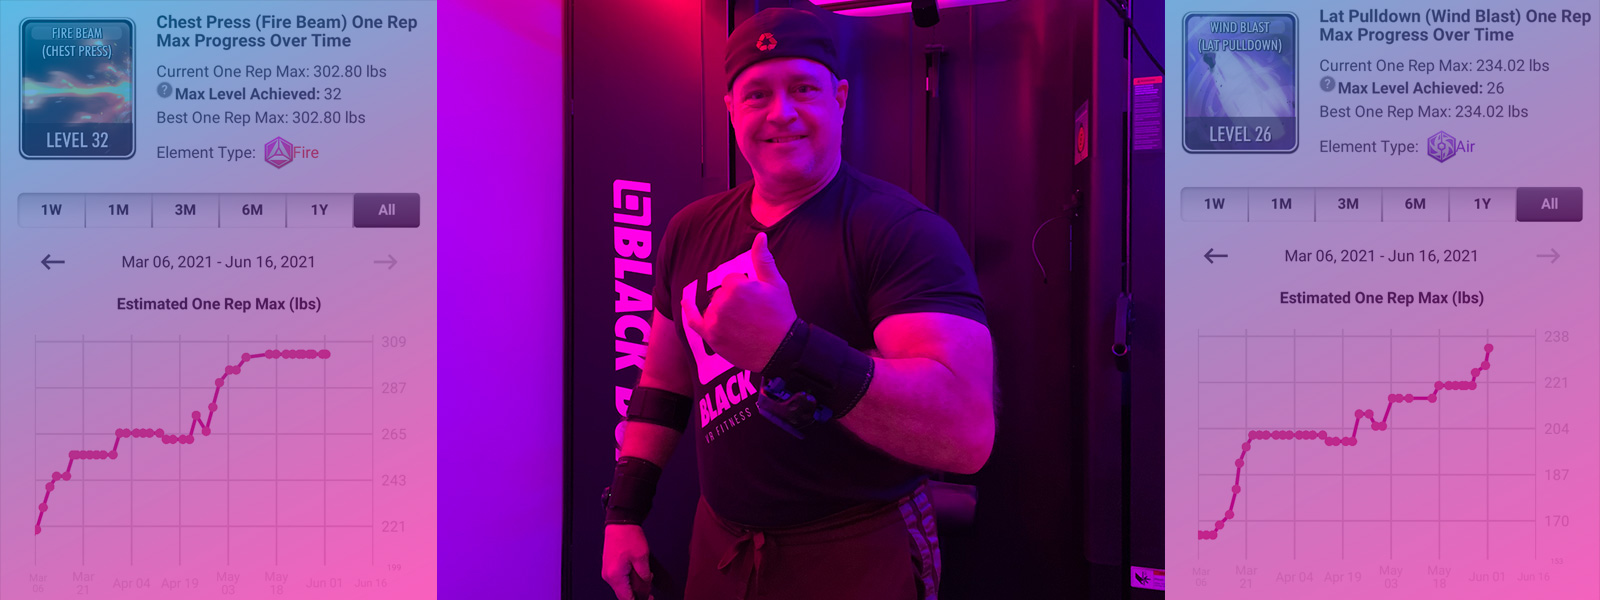 Ex Power Lifter Brings Stamina And Health Back To His Life With Black Box Fitness